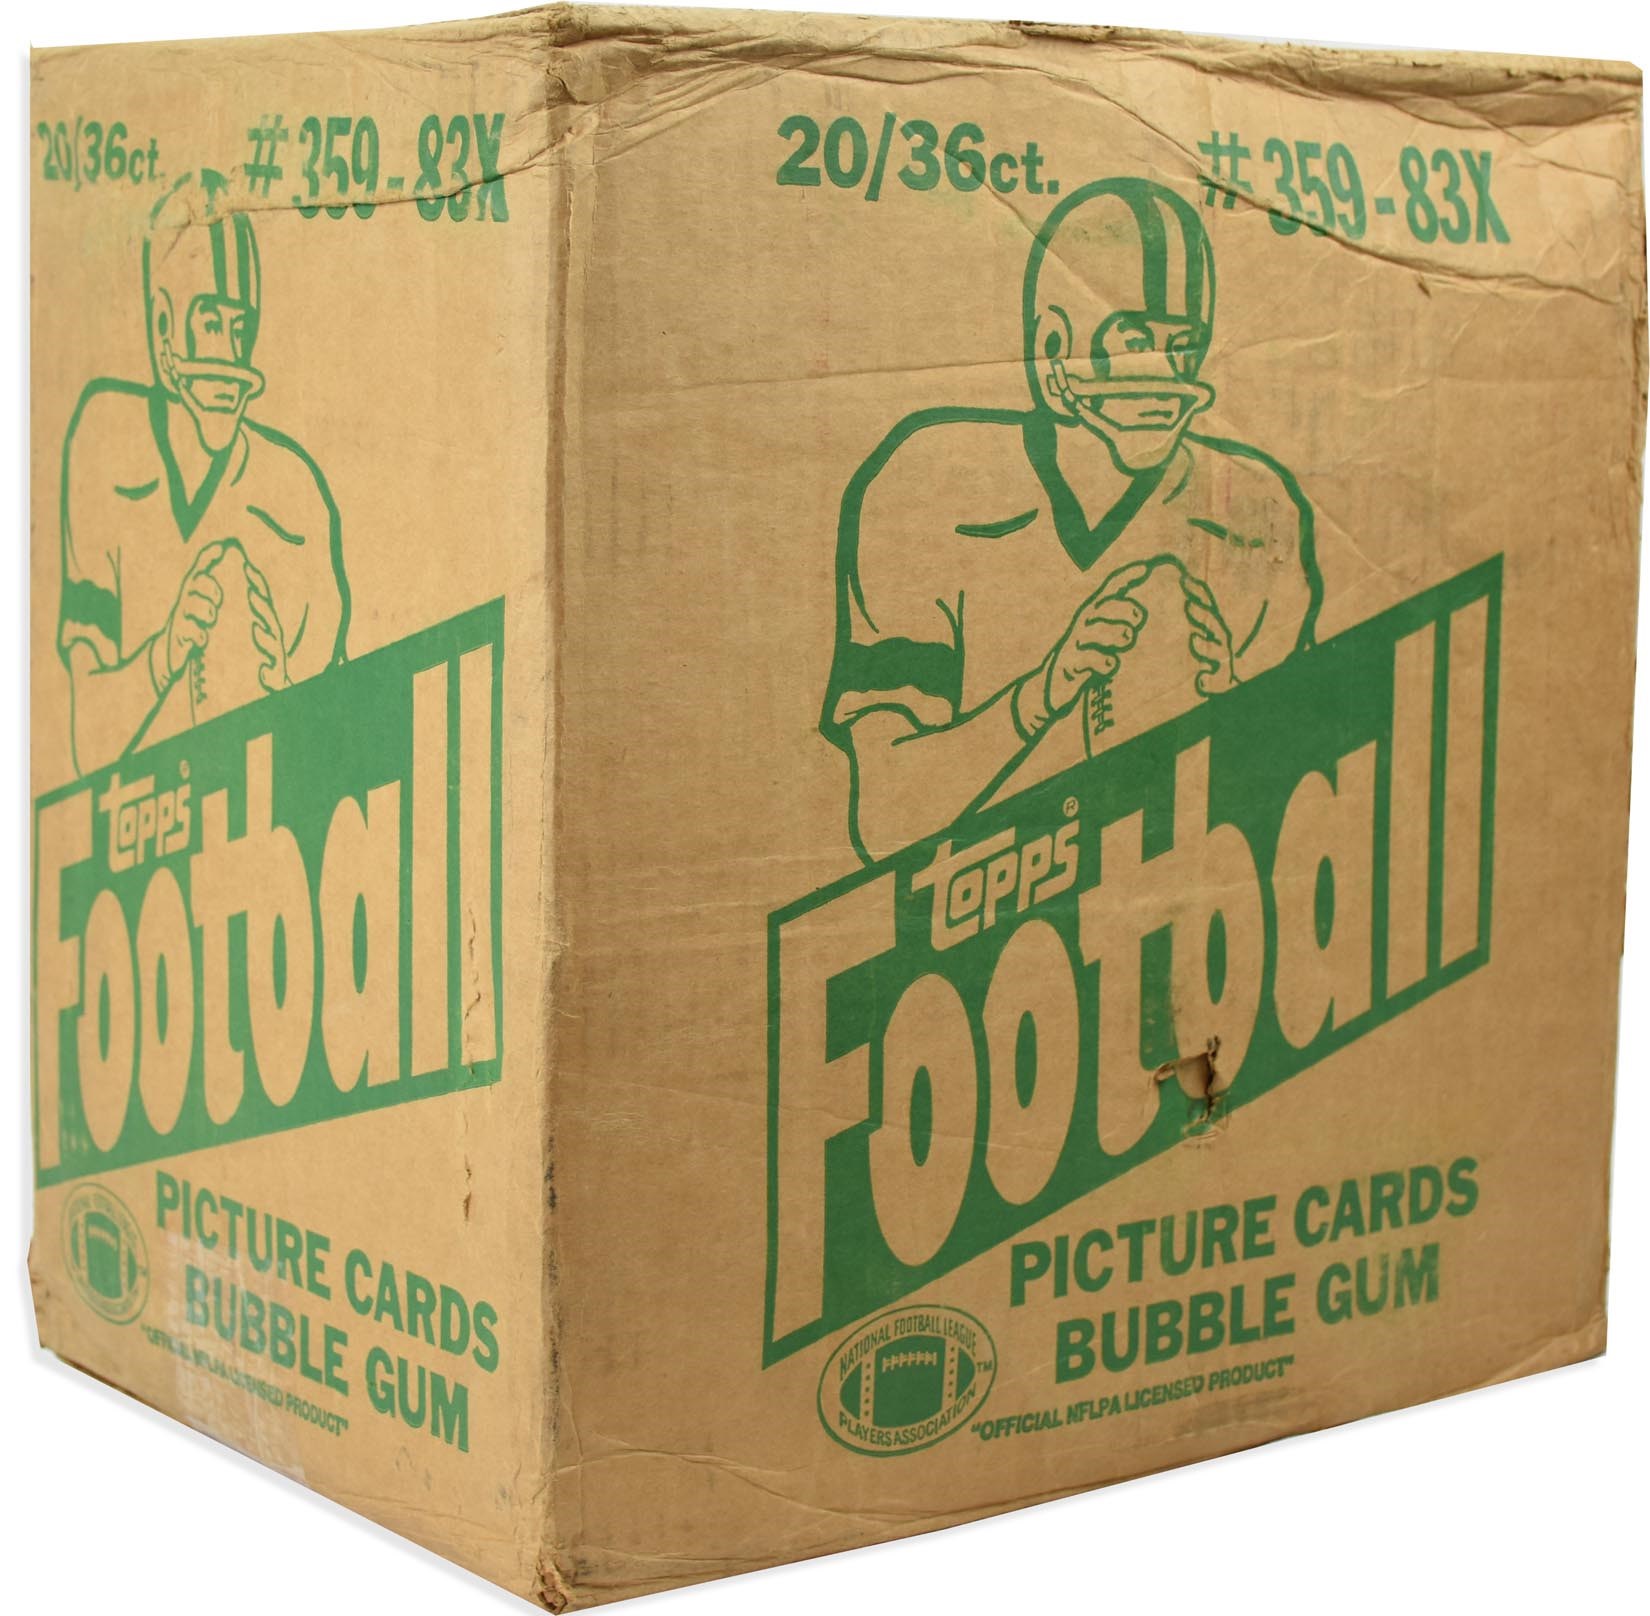 Unopened Wax Packs Boxes and Cases - 1983 Topps Football Unopened Wax Case